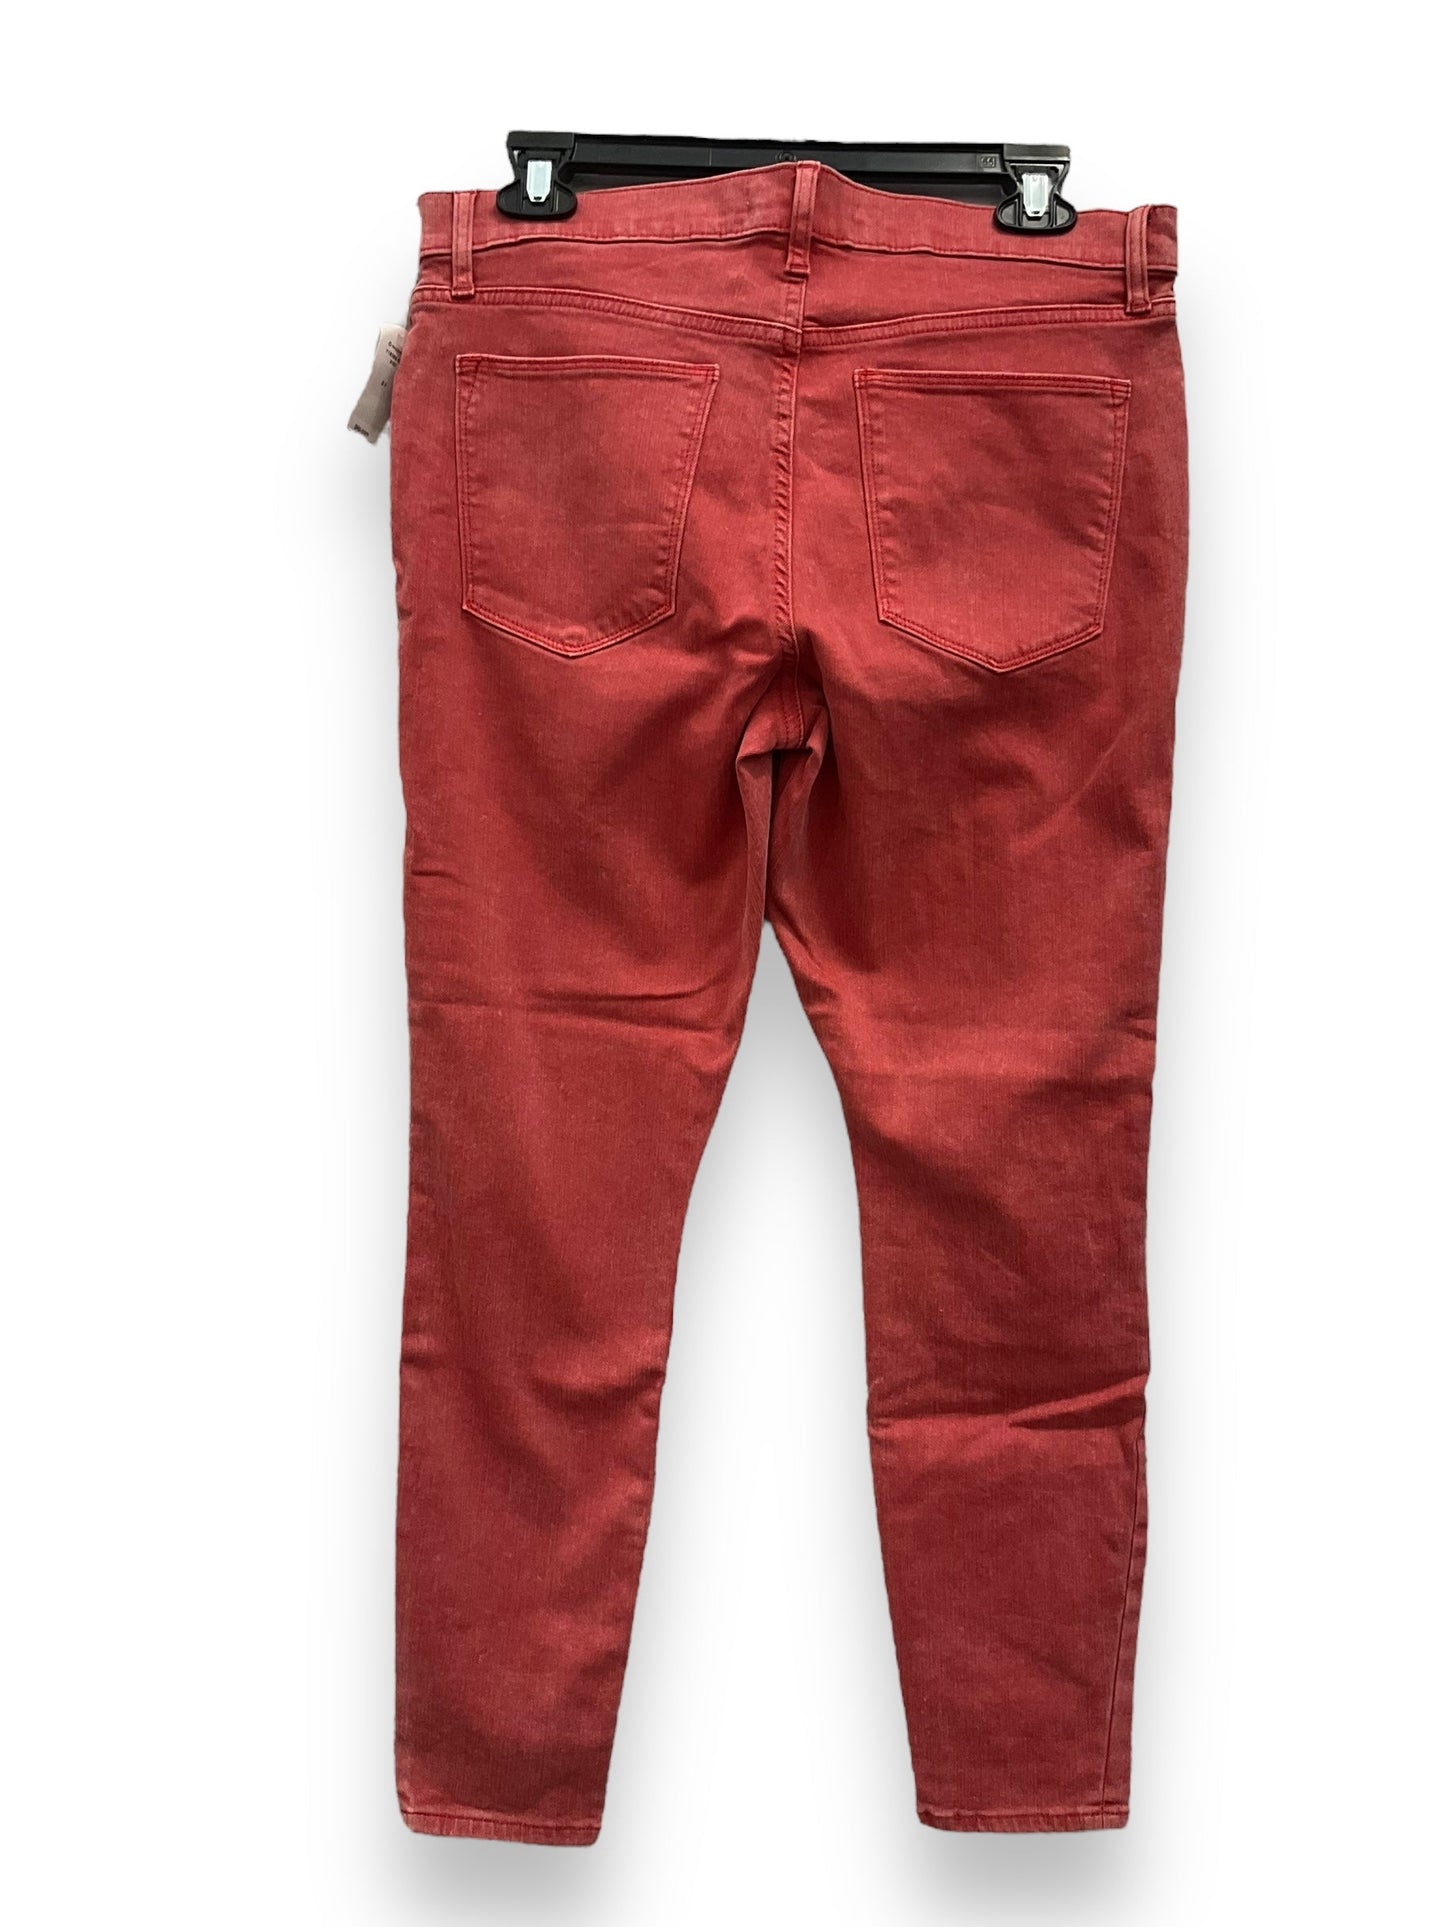 Red Pants Other Gap, Size 12